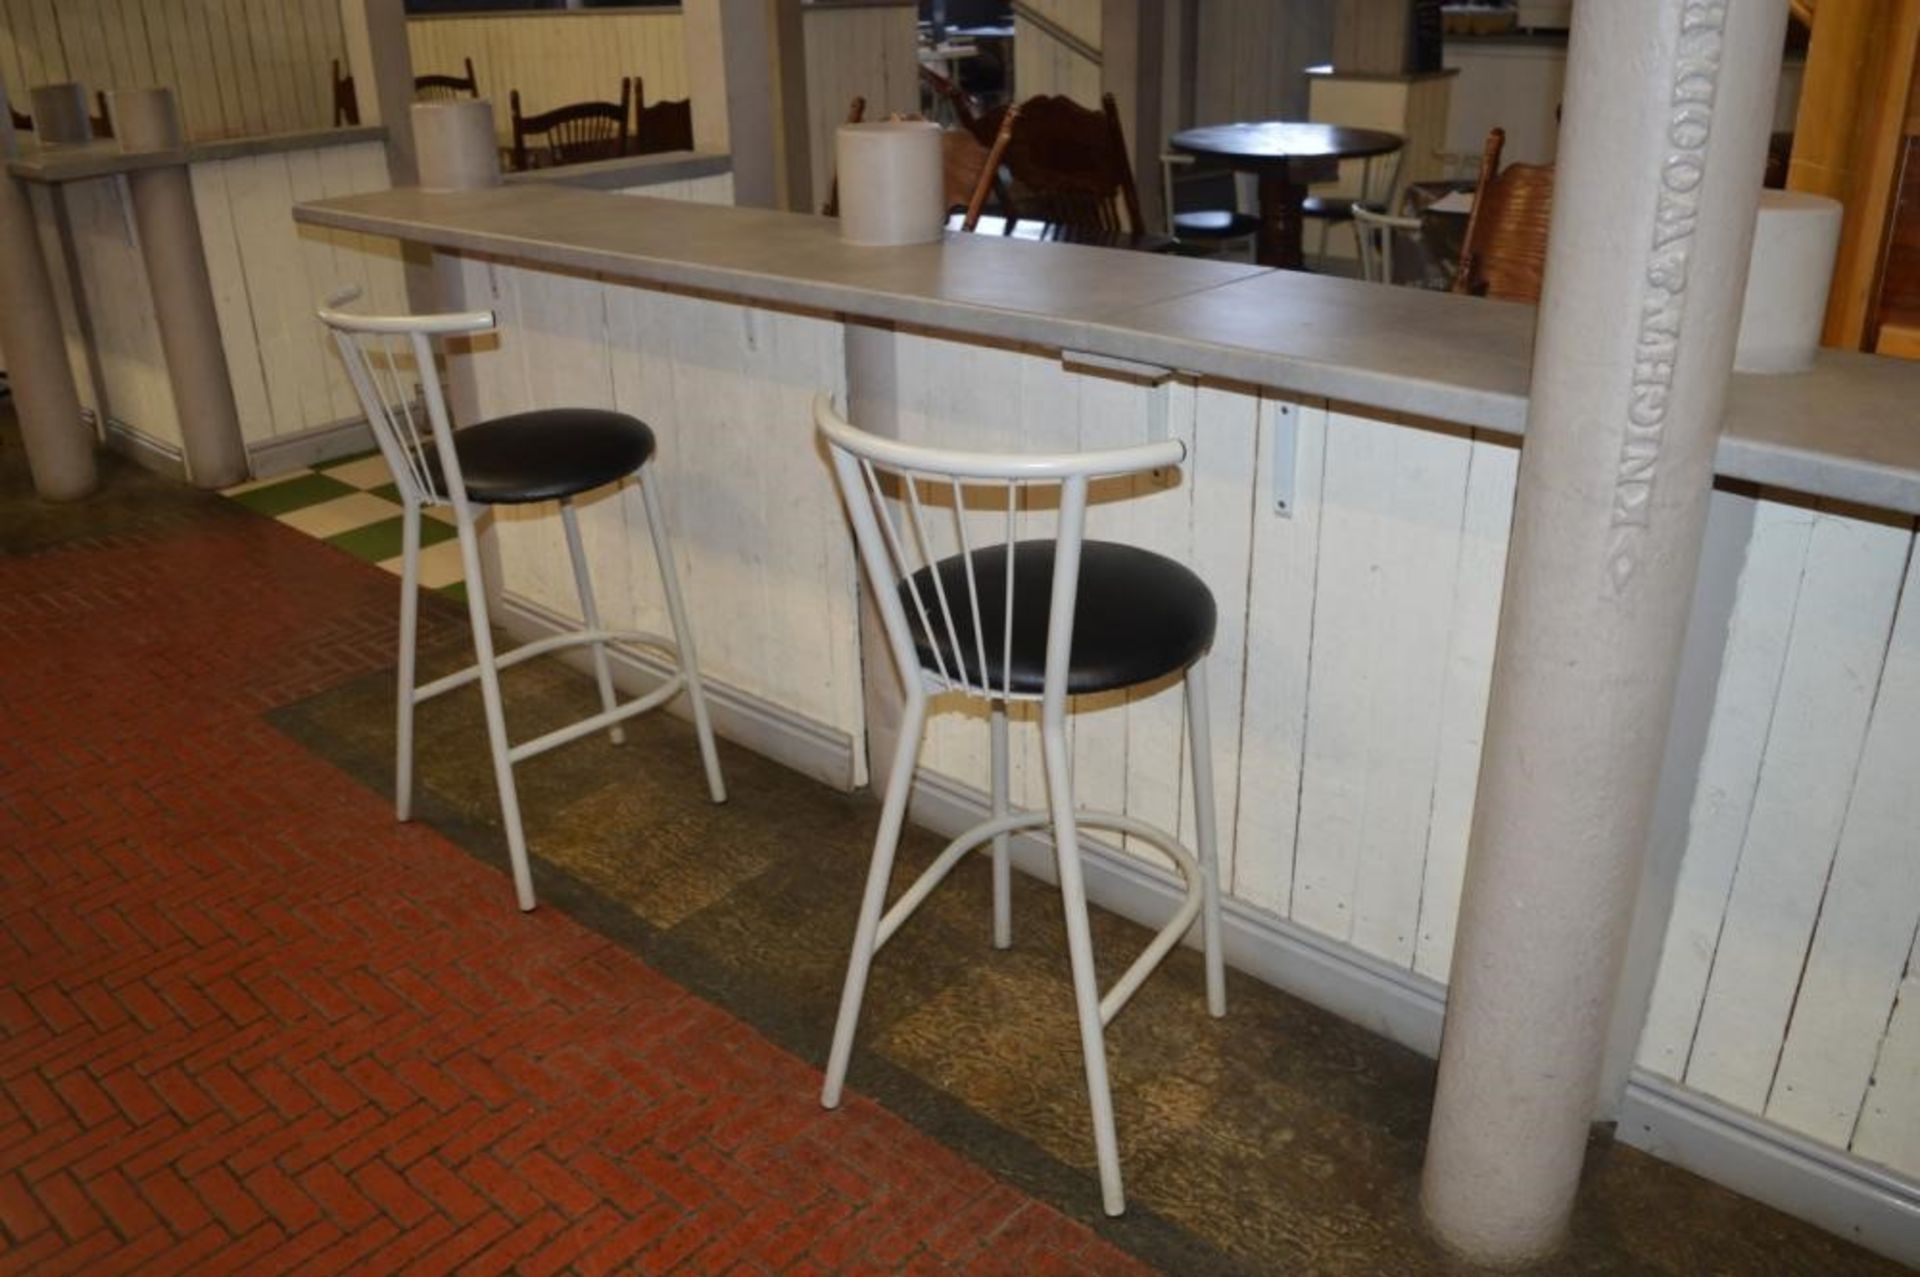 1 x Assorted Collection to Include Botany Bay Cafe 1855 Fixtures - Includes Seating Bar, Wall Paneli - Image 4 of 17